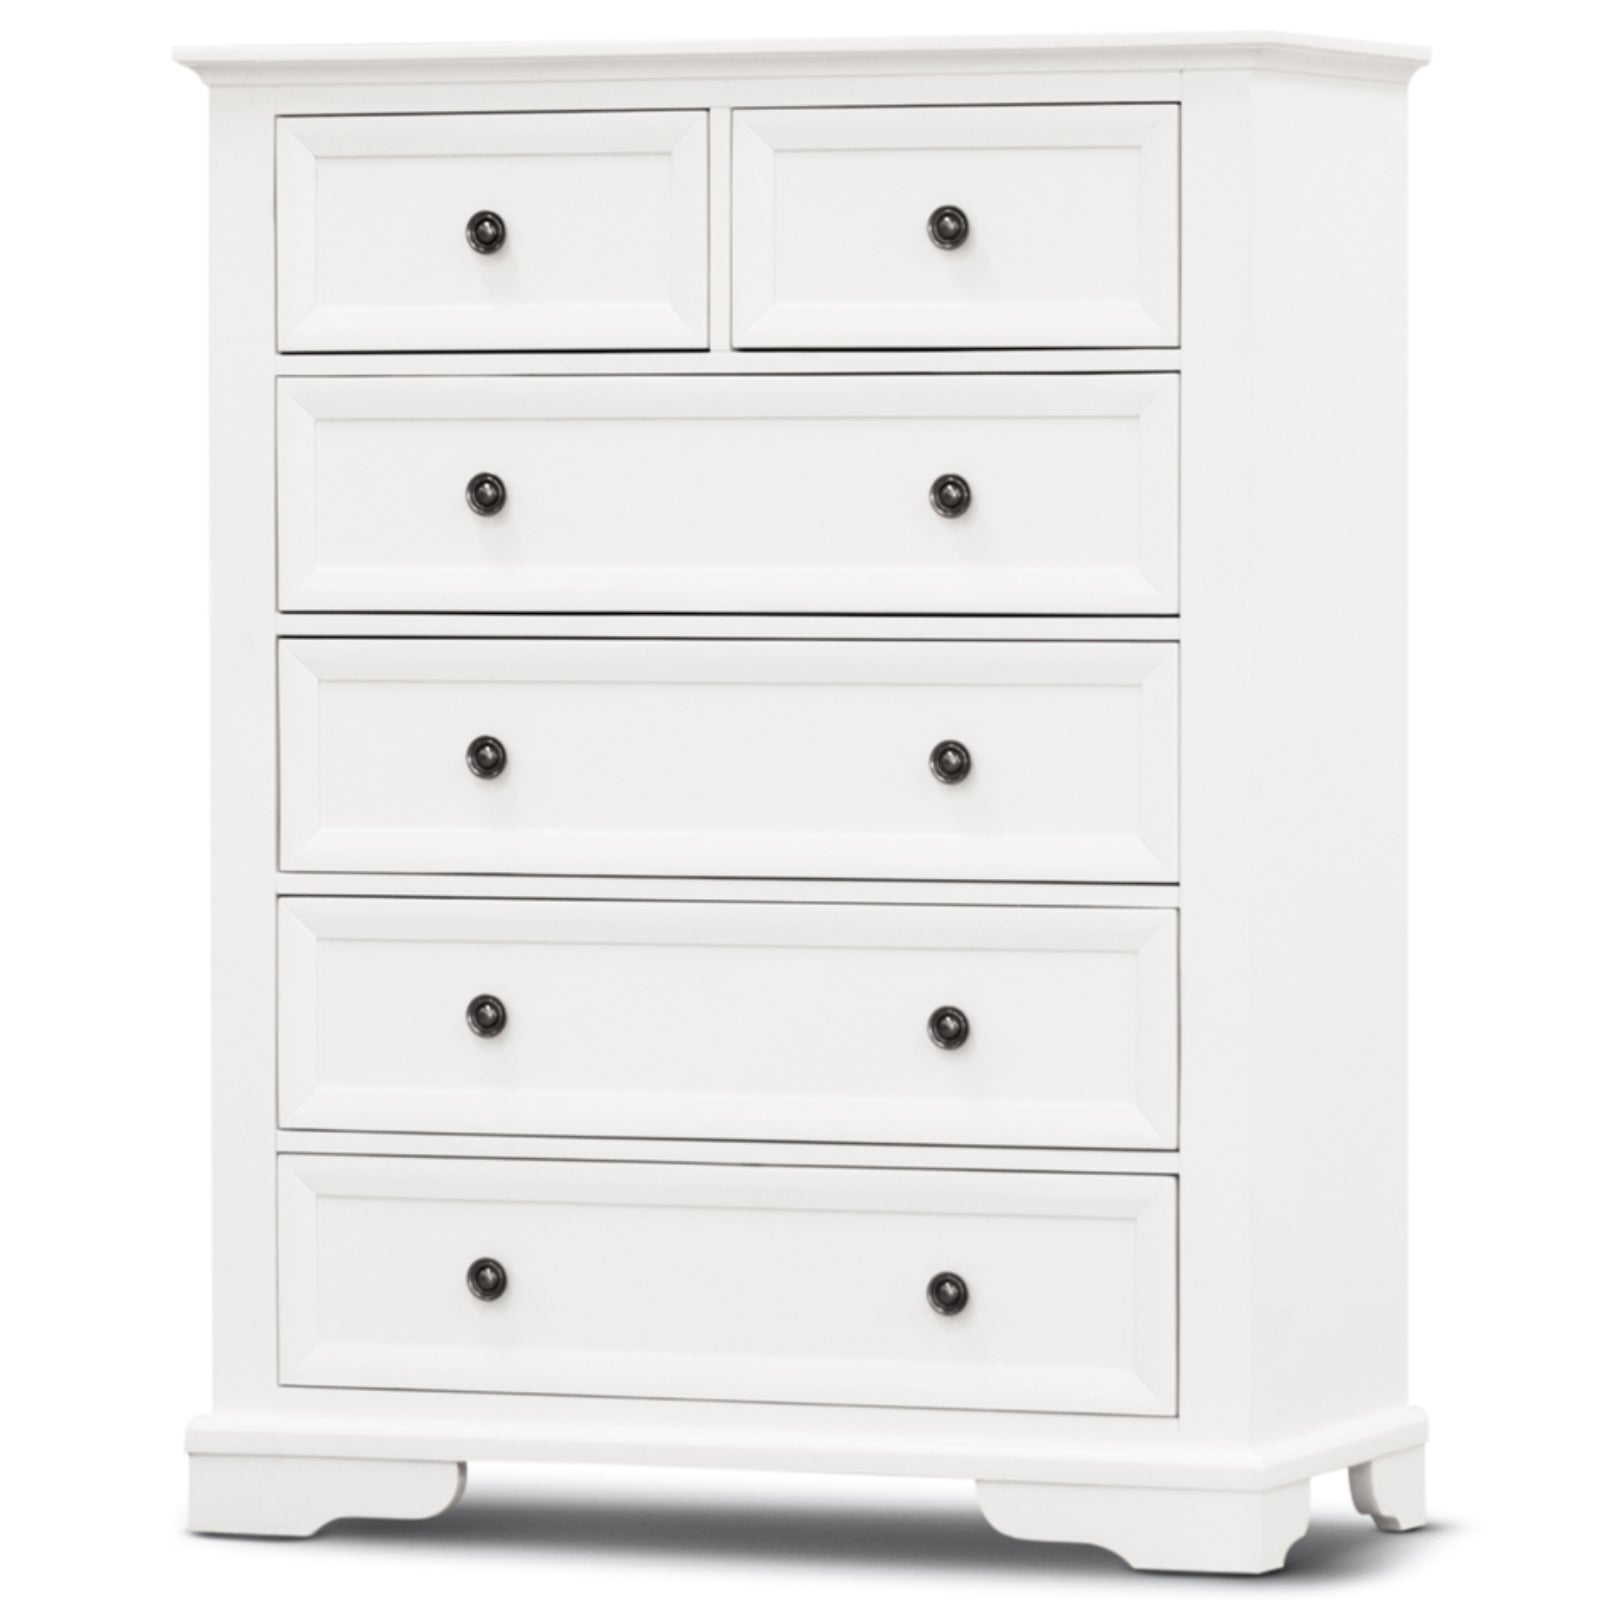 Tallboy 6 Chest of Drawers Solid Acacia Wood Bed Storage Cabinet - White